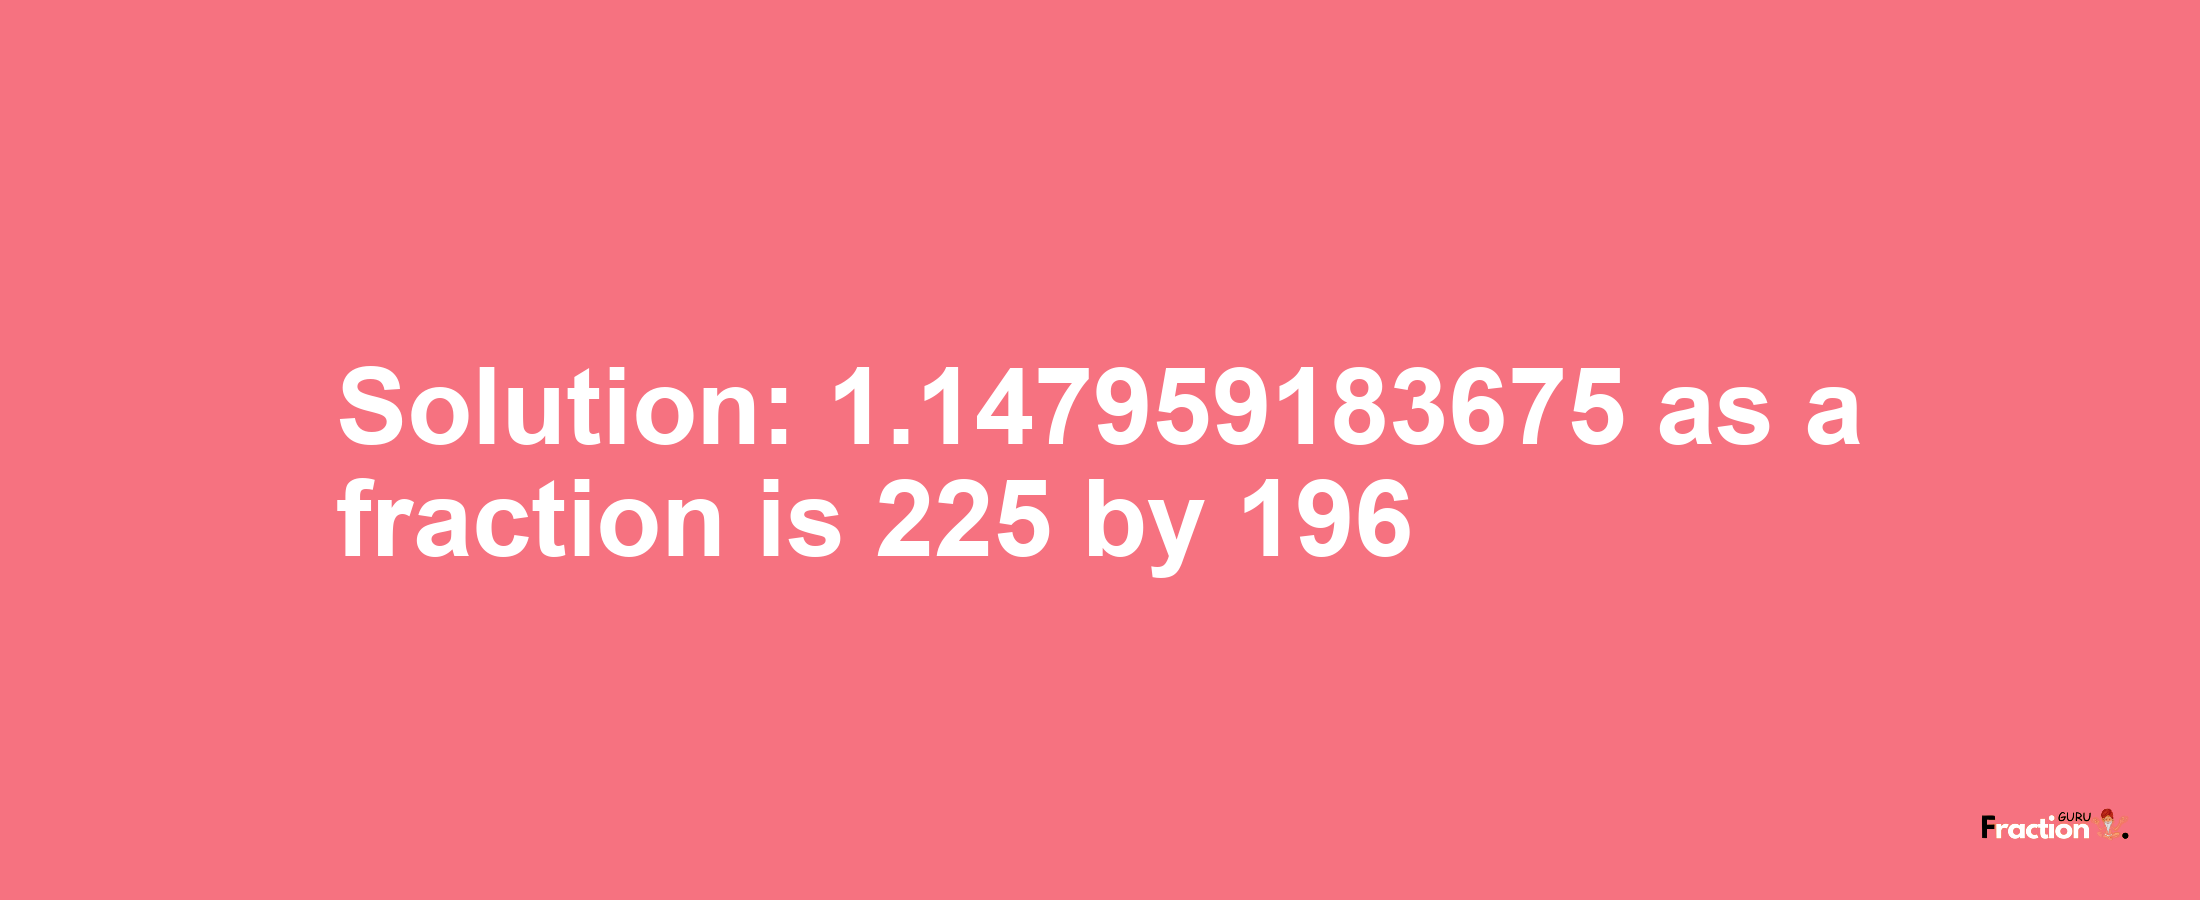 Solution:1.147959183675 as a fraction is 225/196